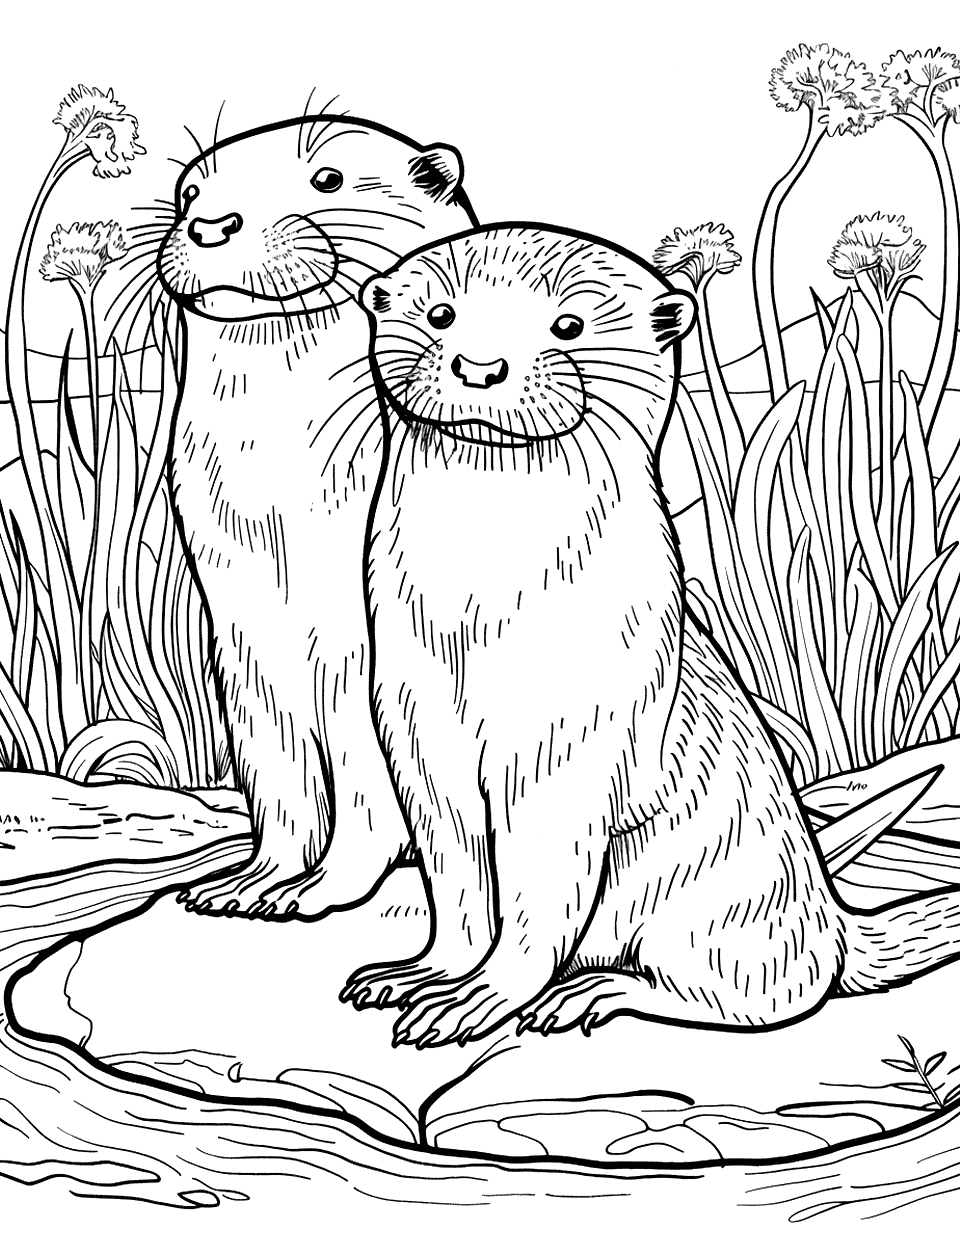 Otter Family at Sunset Coloring Page - A family of otters sitting on a riverbank, watching the sunset.